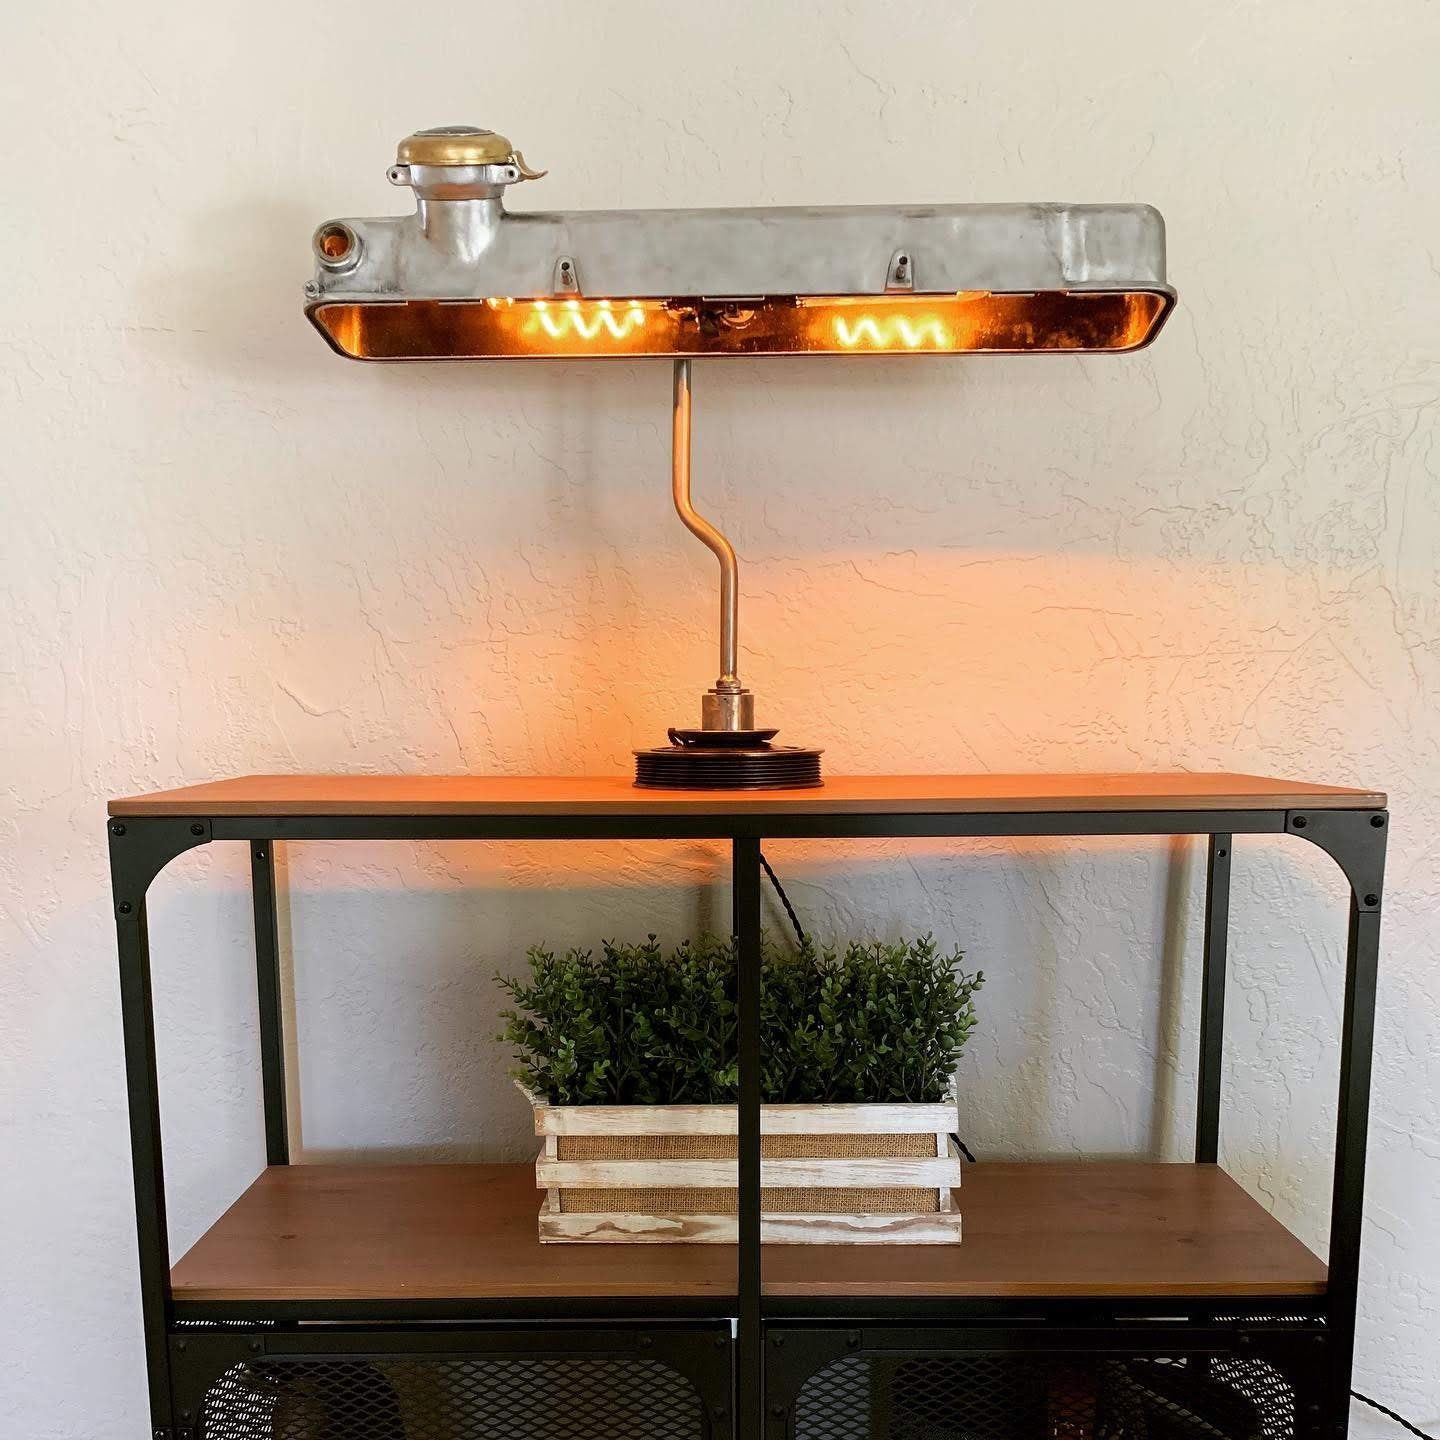 Desk lamp made out of a car's valve cover lit on top of an entryway table.